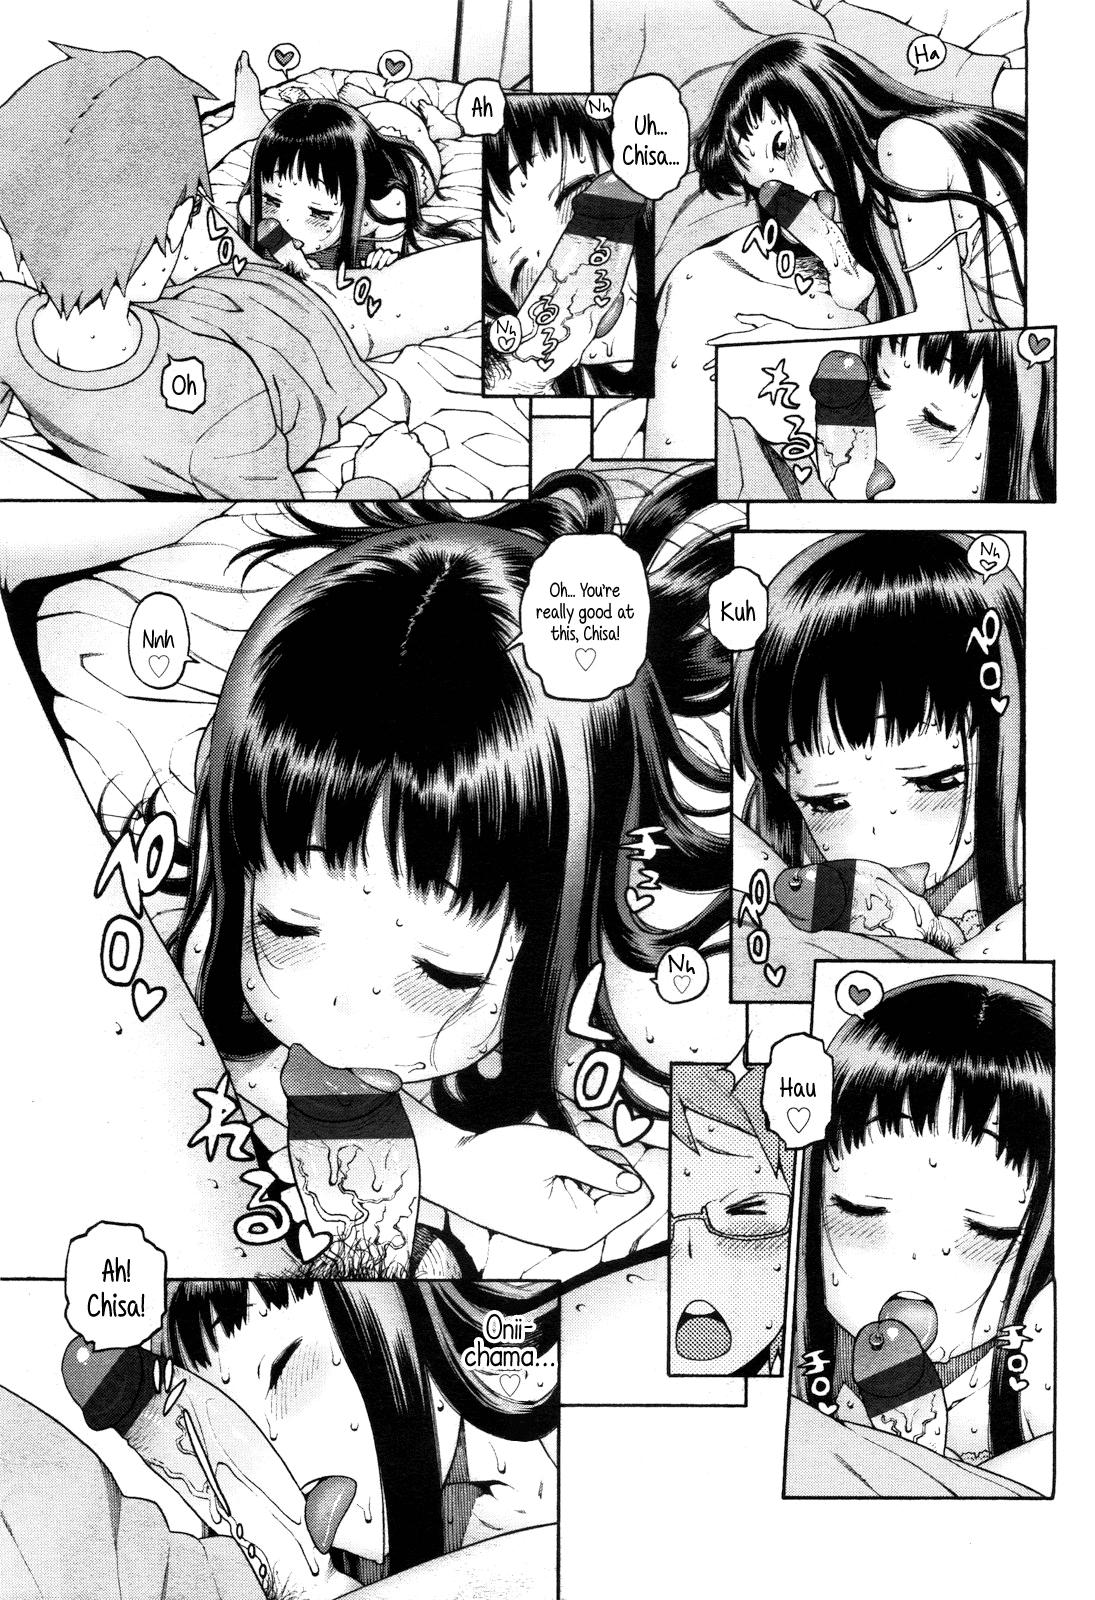 Small Tits Chisa to Oniichama | Chisa and Onii-chama Gay Blowjob - Page 11